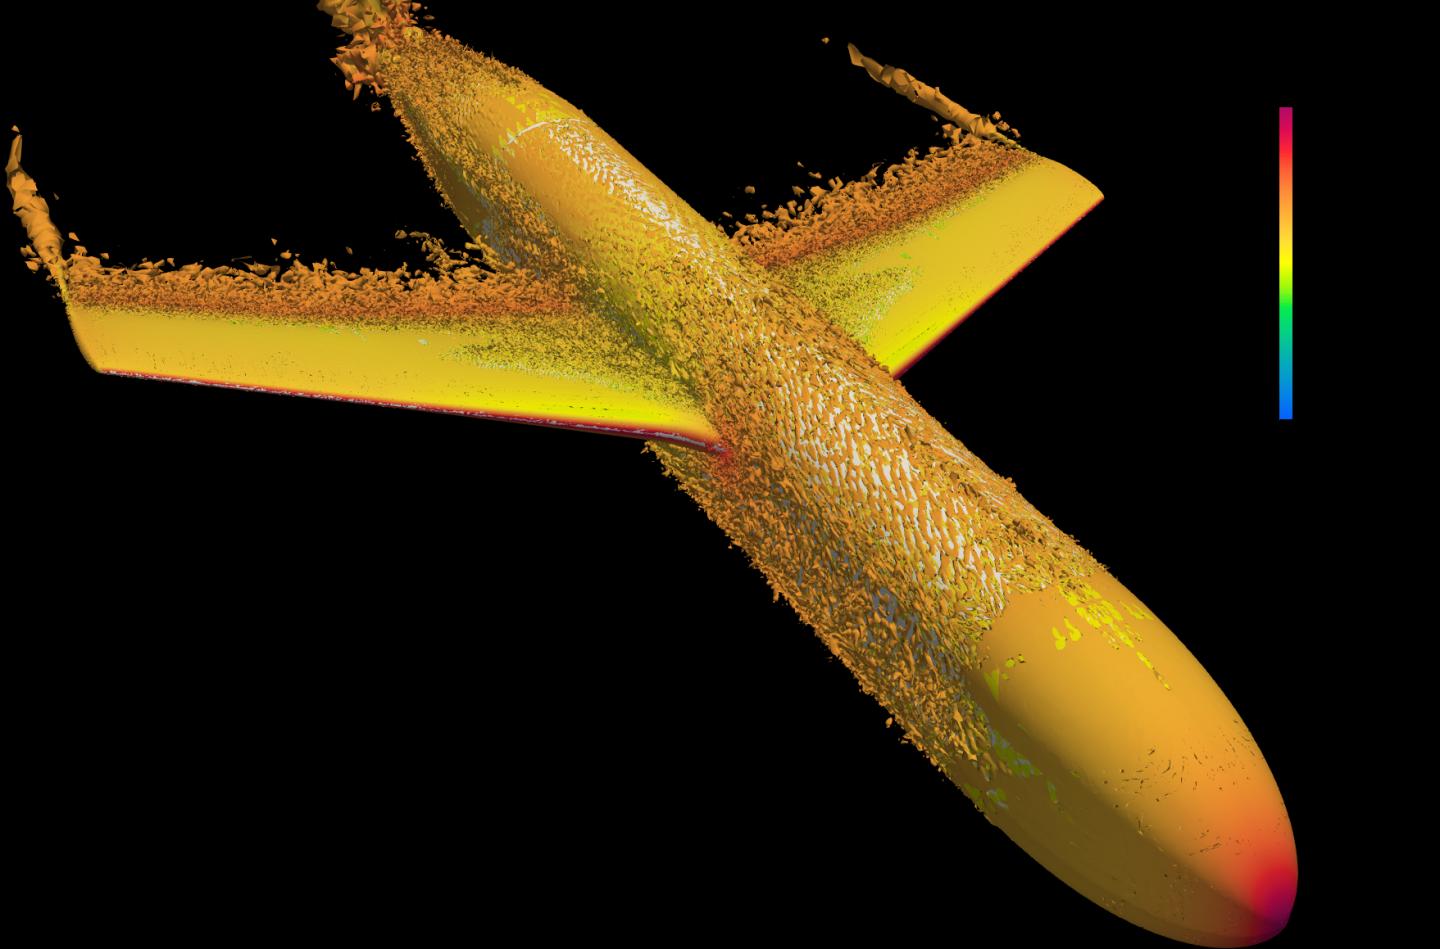 Computer model of a plane with simulated turbulence around it.